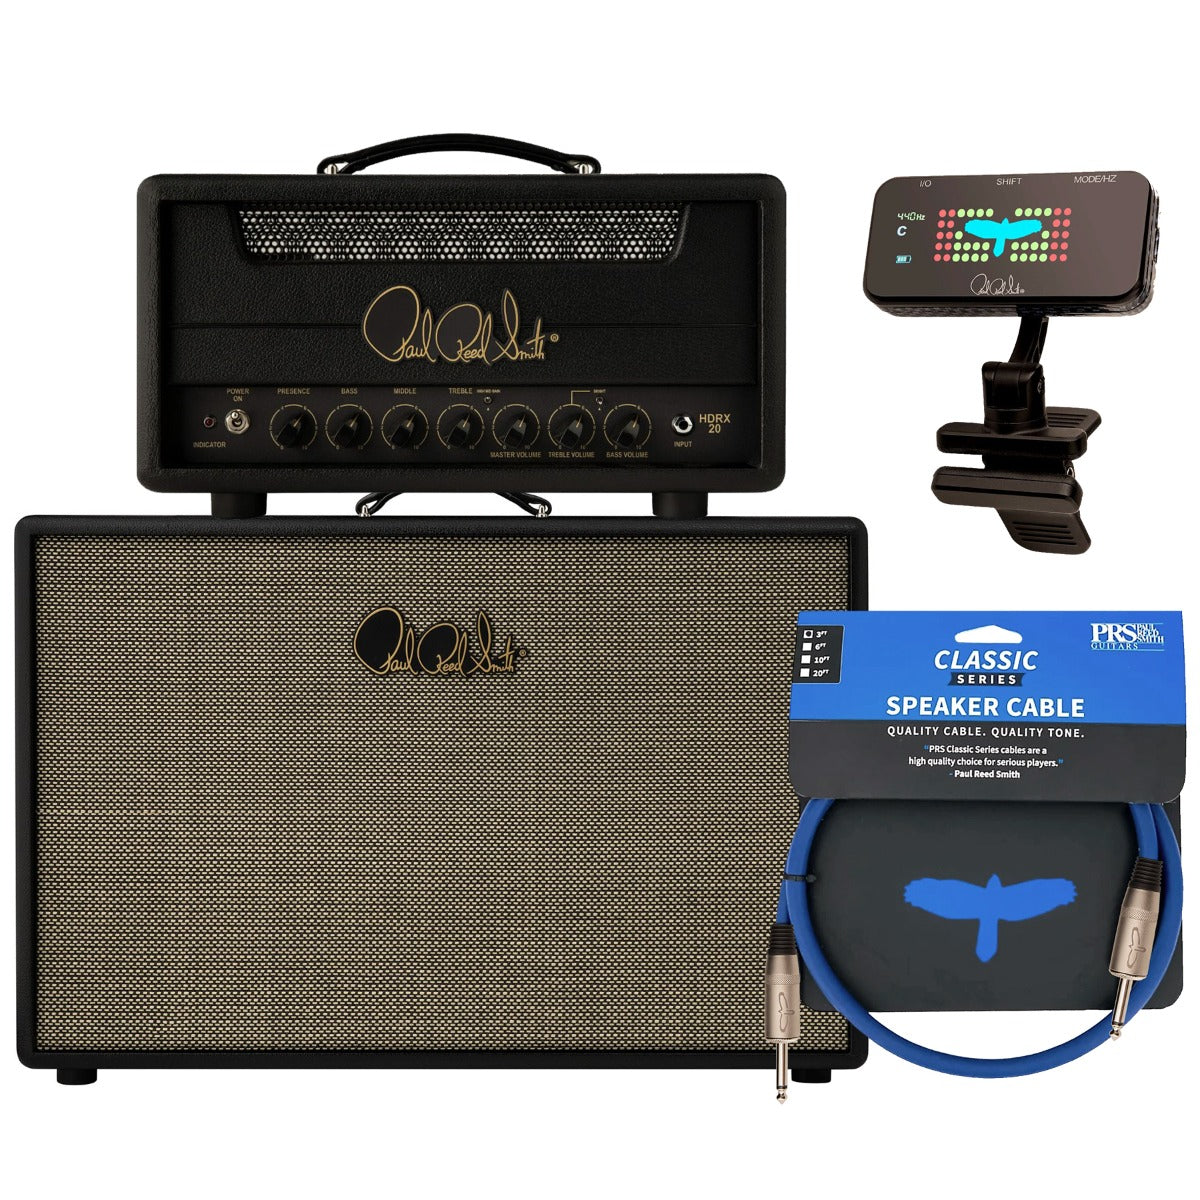 Collage of the PRS HDRX 20 - 20-watt Guitar Amplifier Head 2x12 BUNDLE showing included components